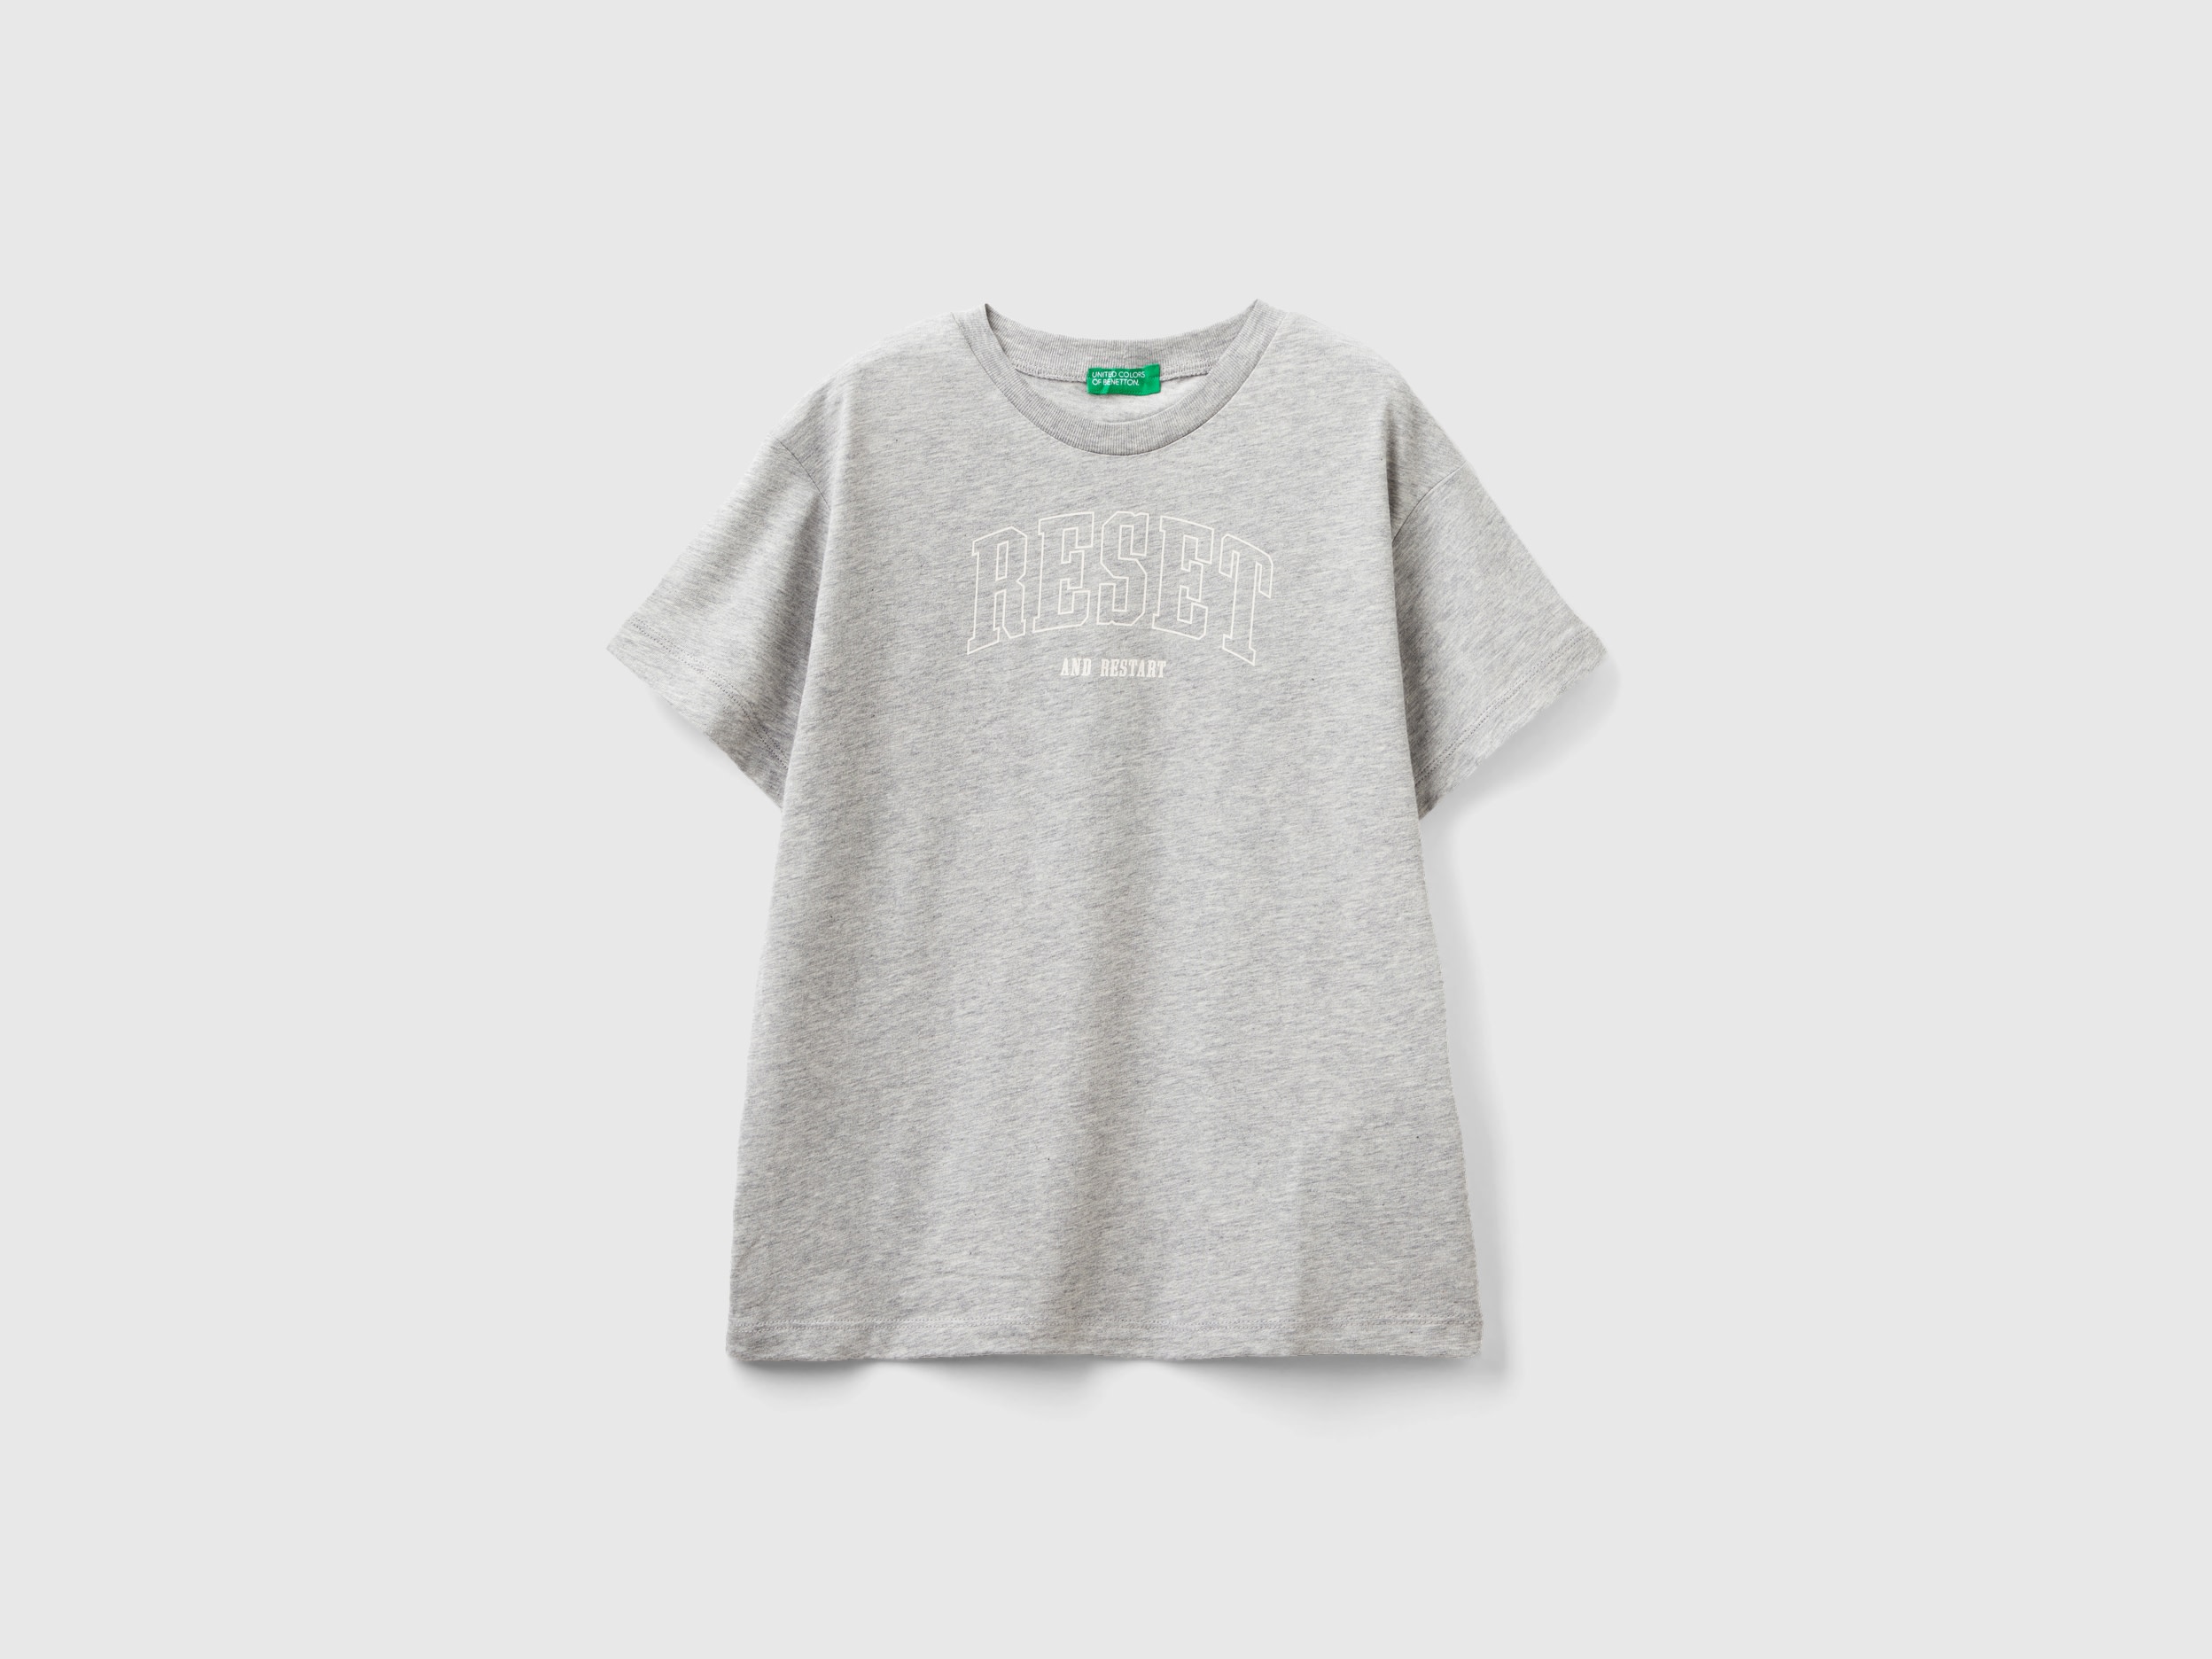 Benetton, T-shirt With Print In Organic Cotton, size S, Light Gray, Kids